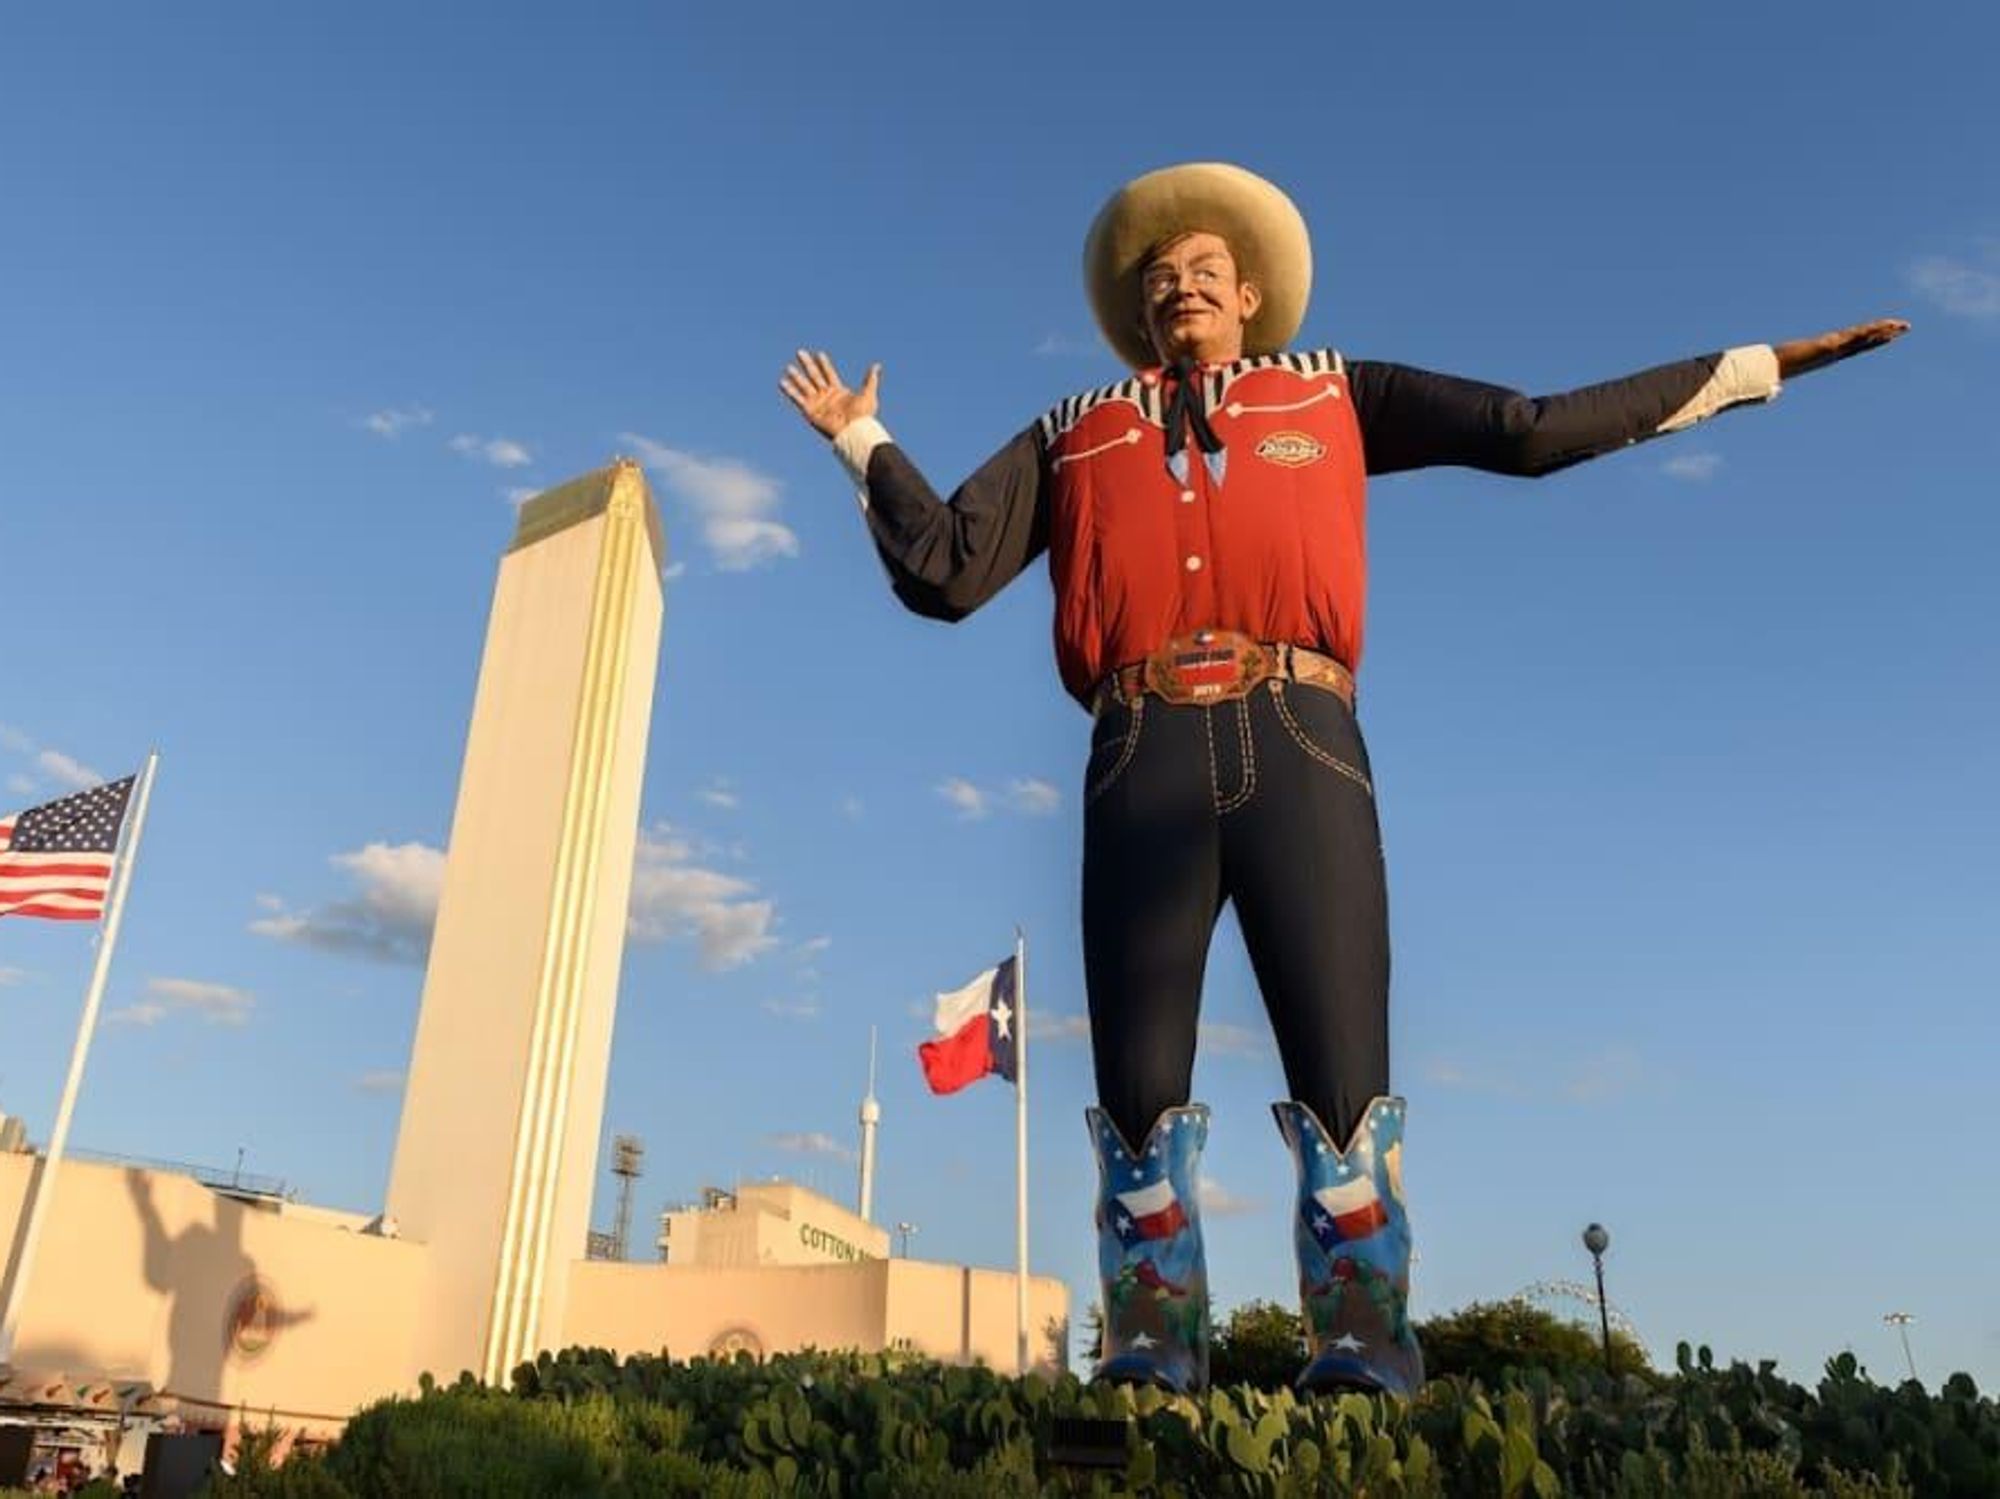 Big Tex at the State Fair of Texas